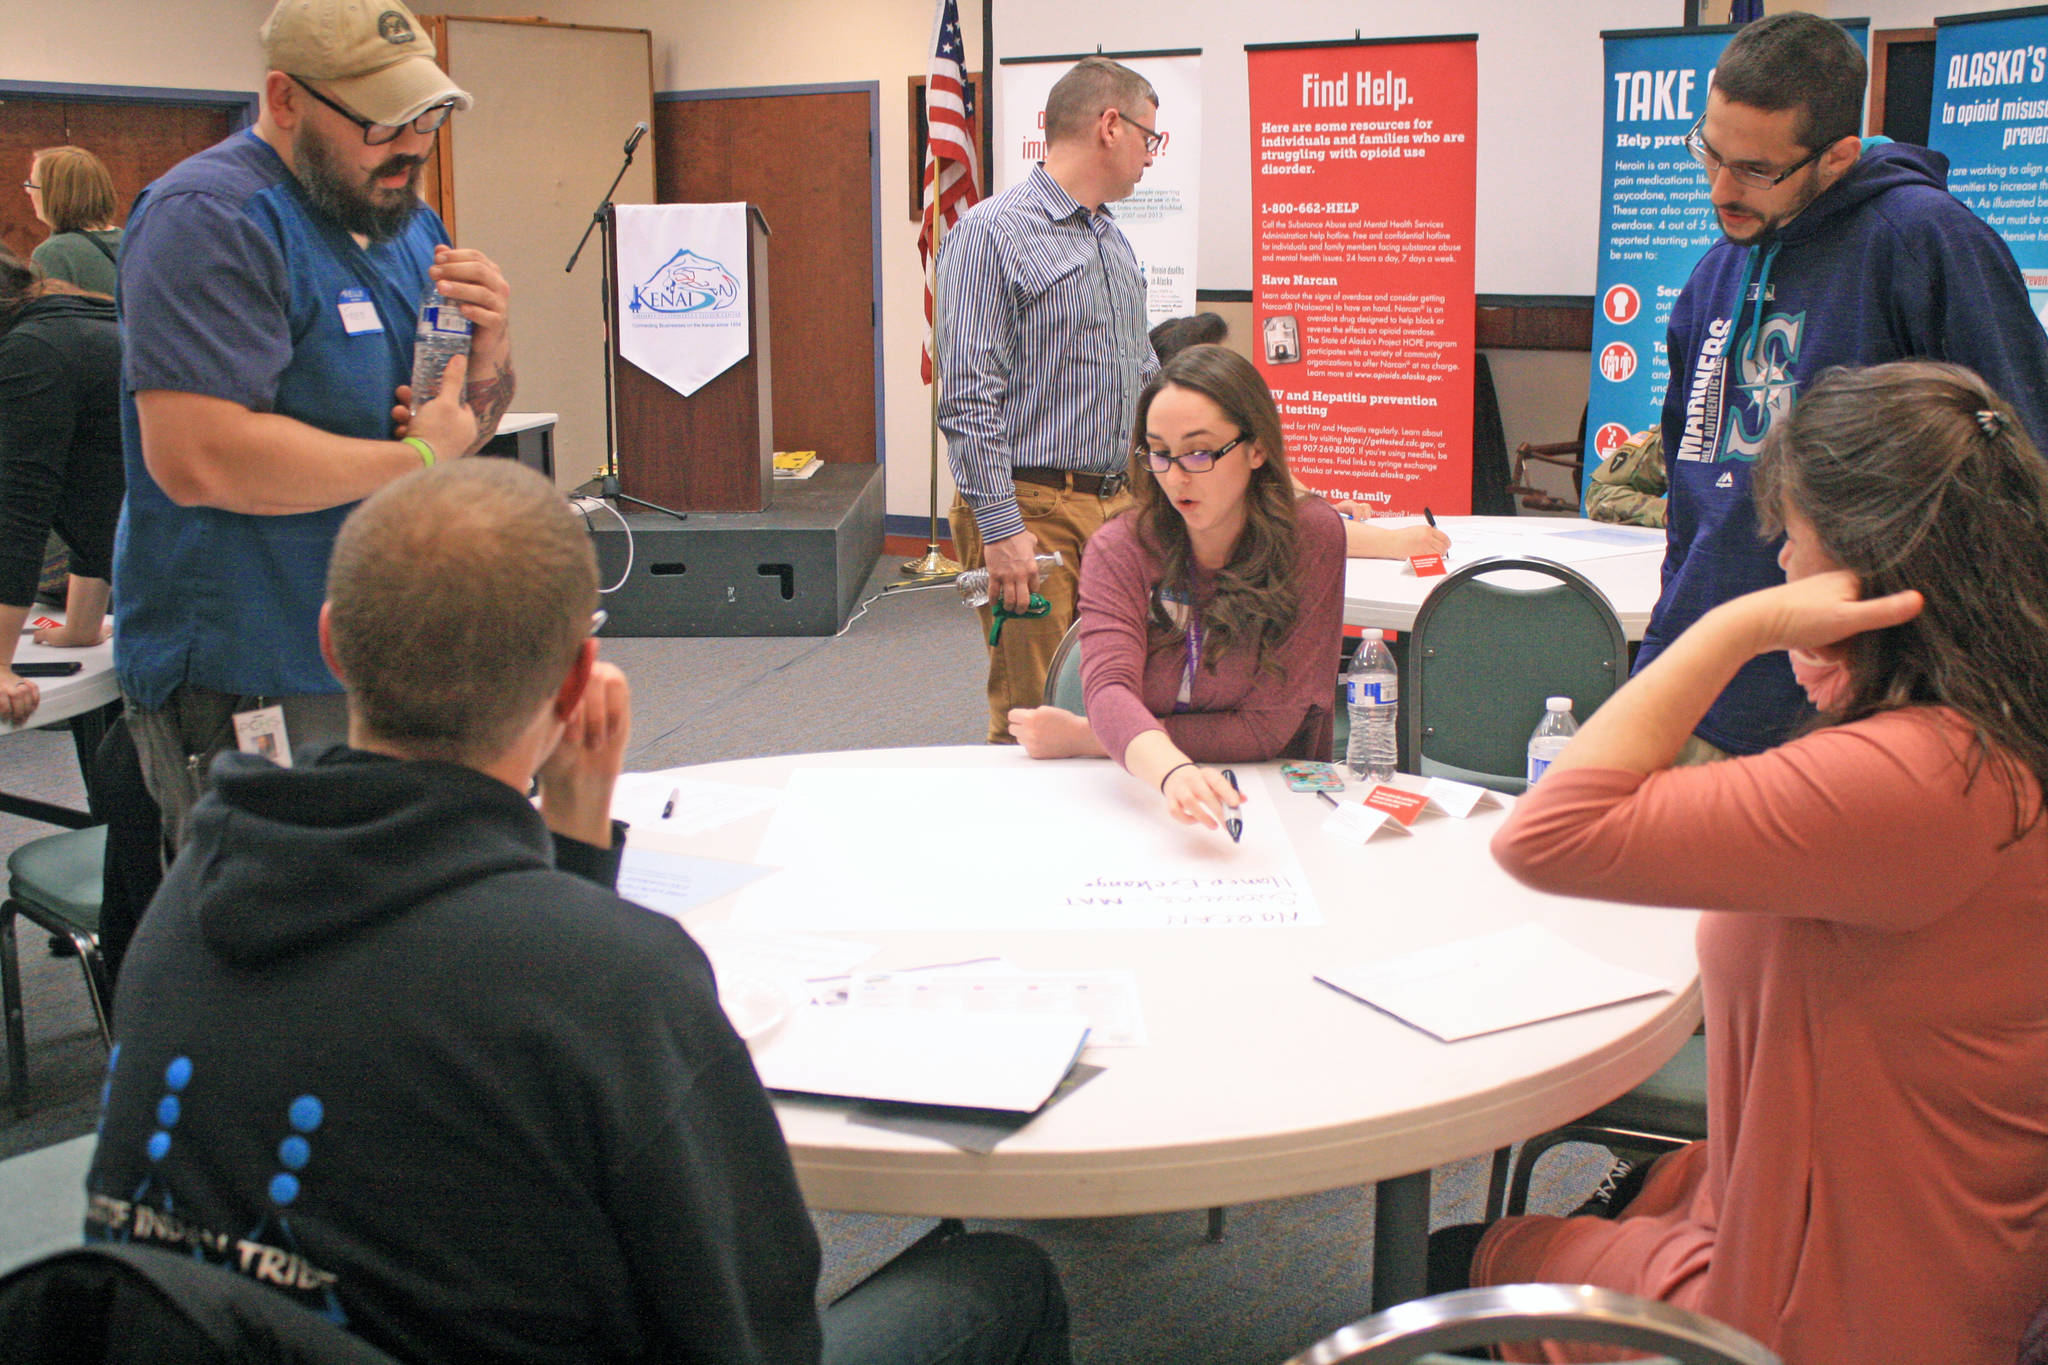 Members of the Kenai community brainstorm on opioid response efforts during the Your Voice, Your Community forum on Thursday, March 8, 2018 at the Kenai Visitors and Cultural Center in Kenai, Alaska. (Photo by Erin Thompson/Peninsula Clarion)